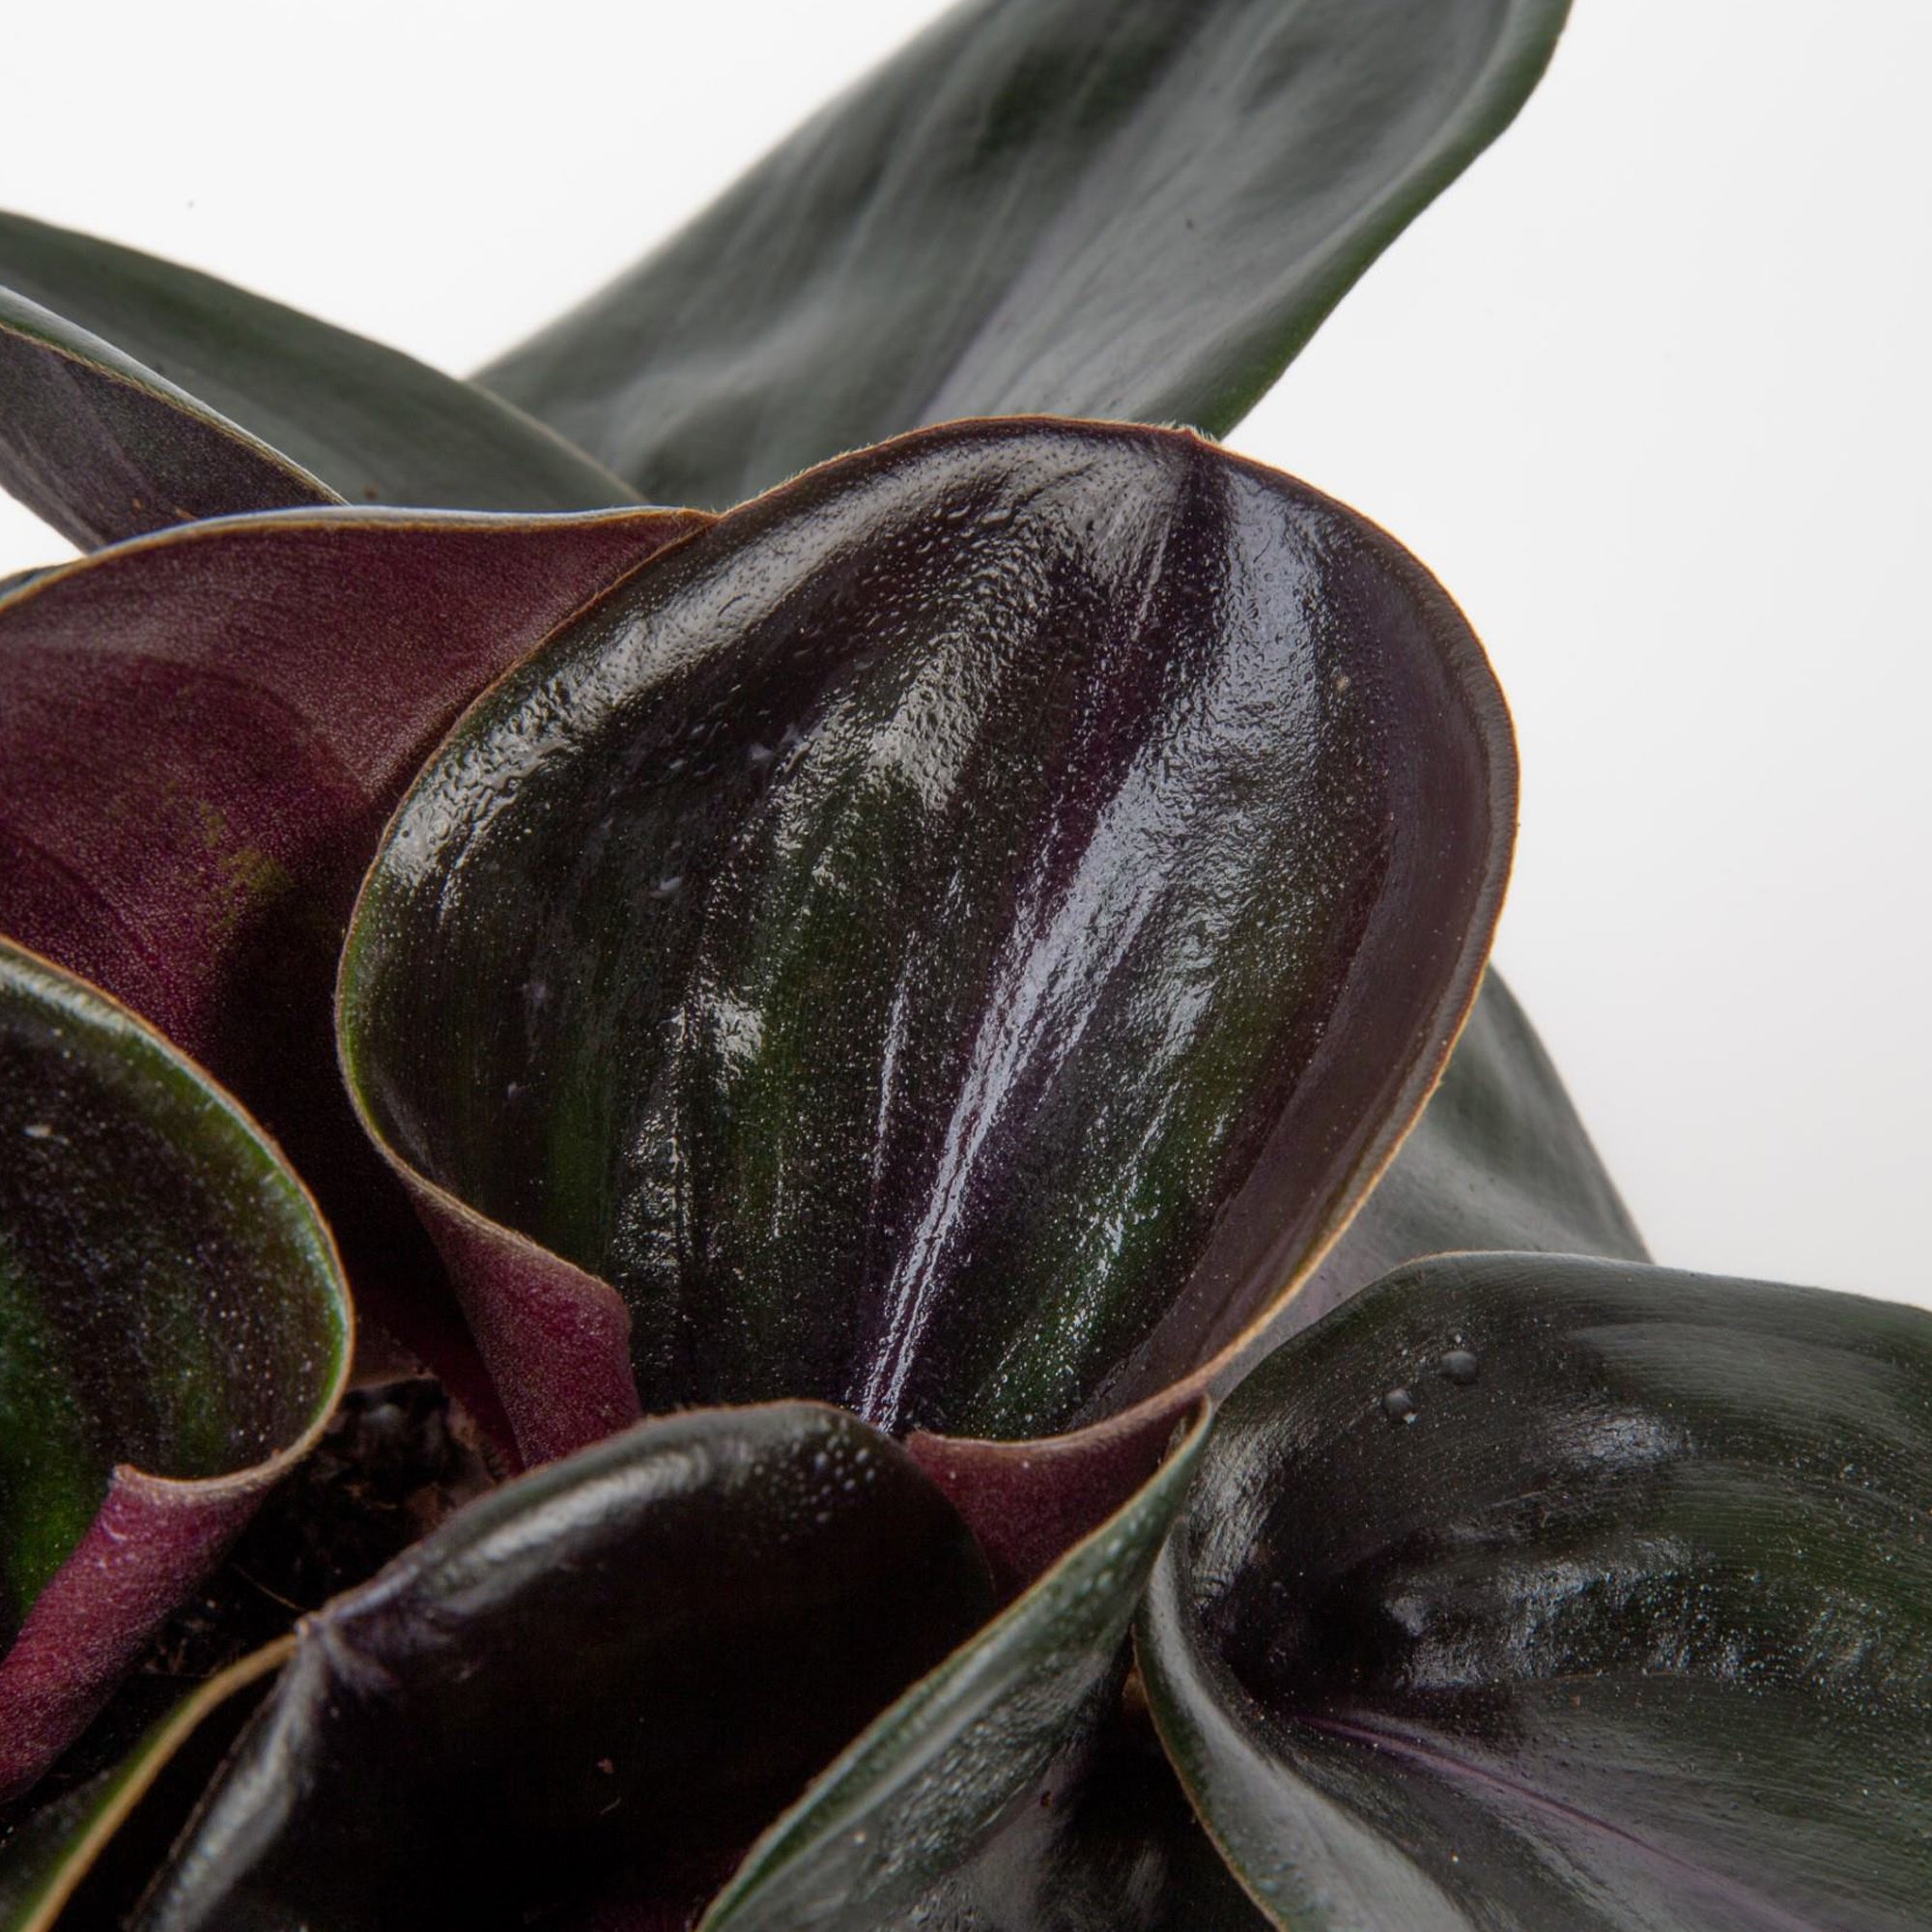 detail view of Geogenanthus foliage, you can see the deep and dark shades of burgundy, purple and very dark green areas of the leaves